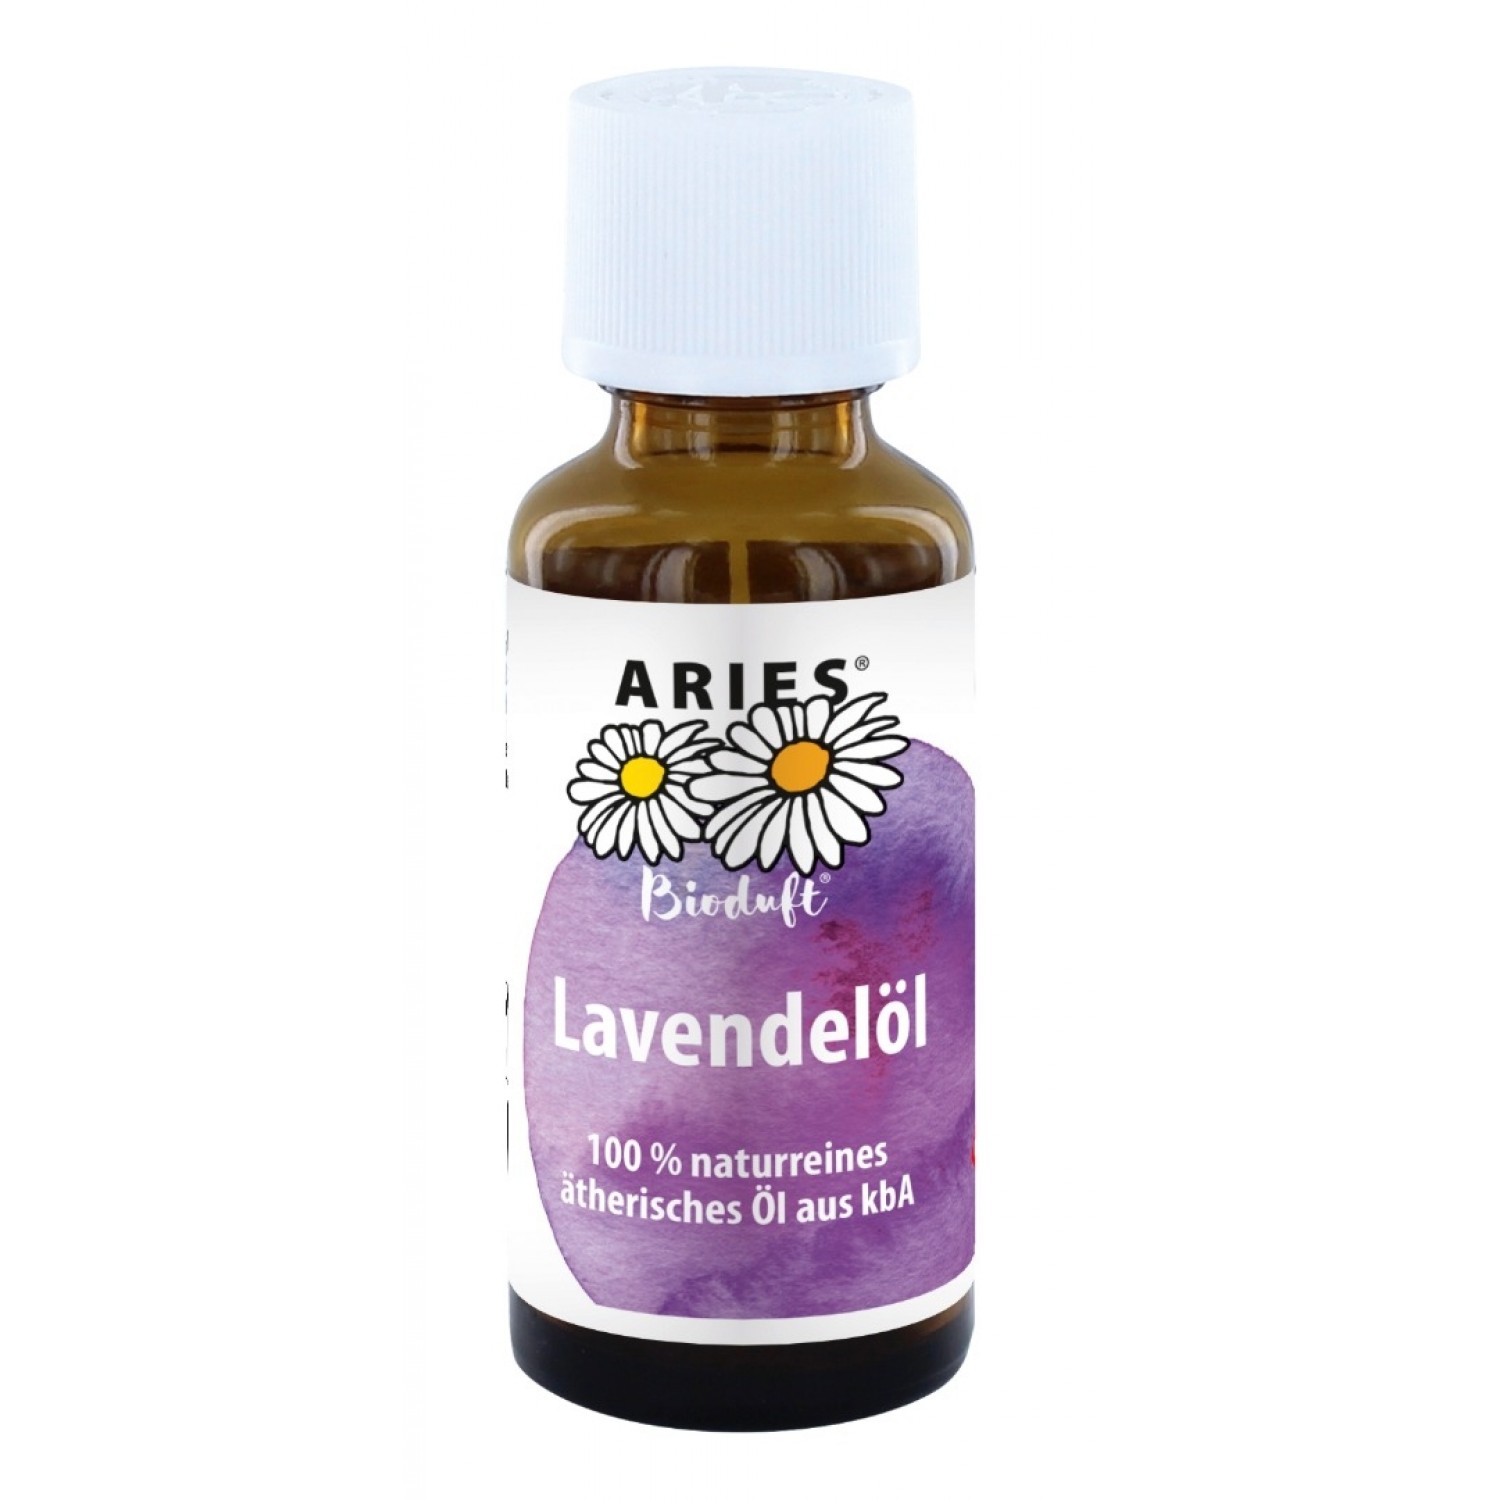 Aries Organic Lavender Scented Oil, Eco Control certified